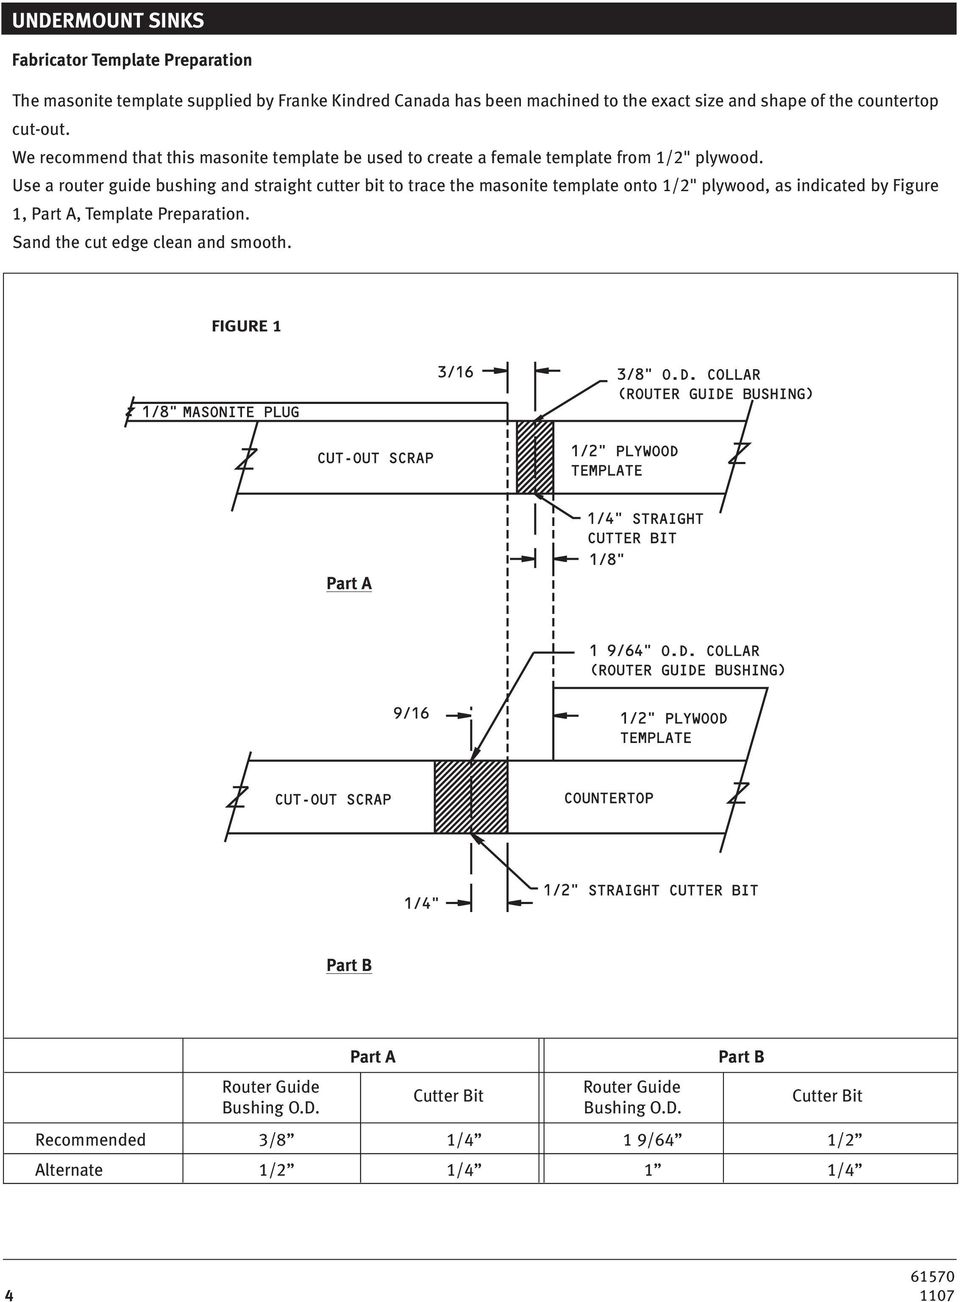 Use a router guide bushing and straight cutter bit to trace the masonite template onto 1/2" plywood, as indicated by Figure 1, Part A, Template Preparation.